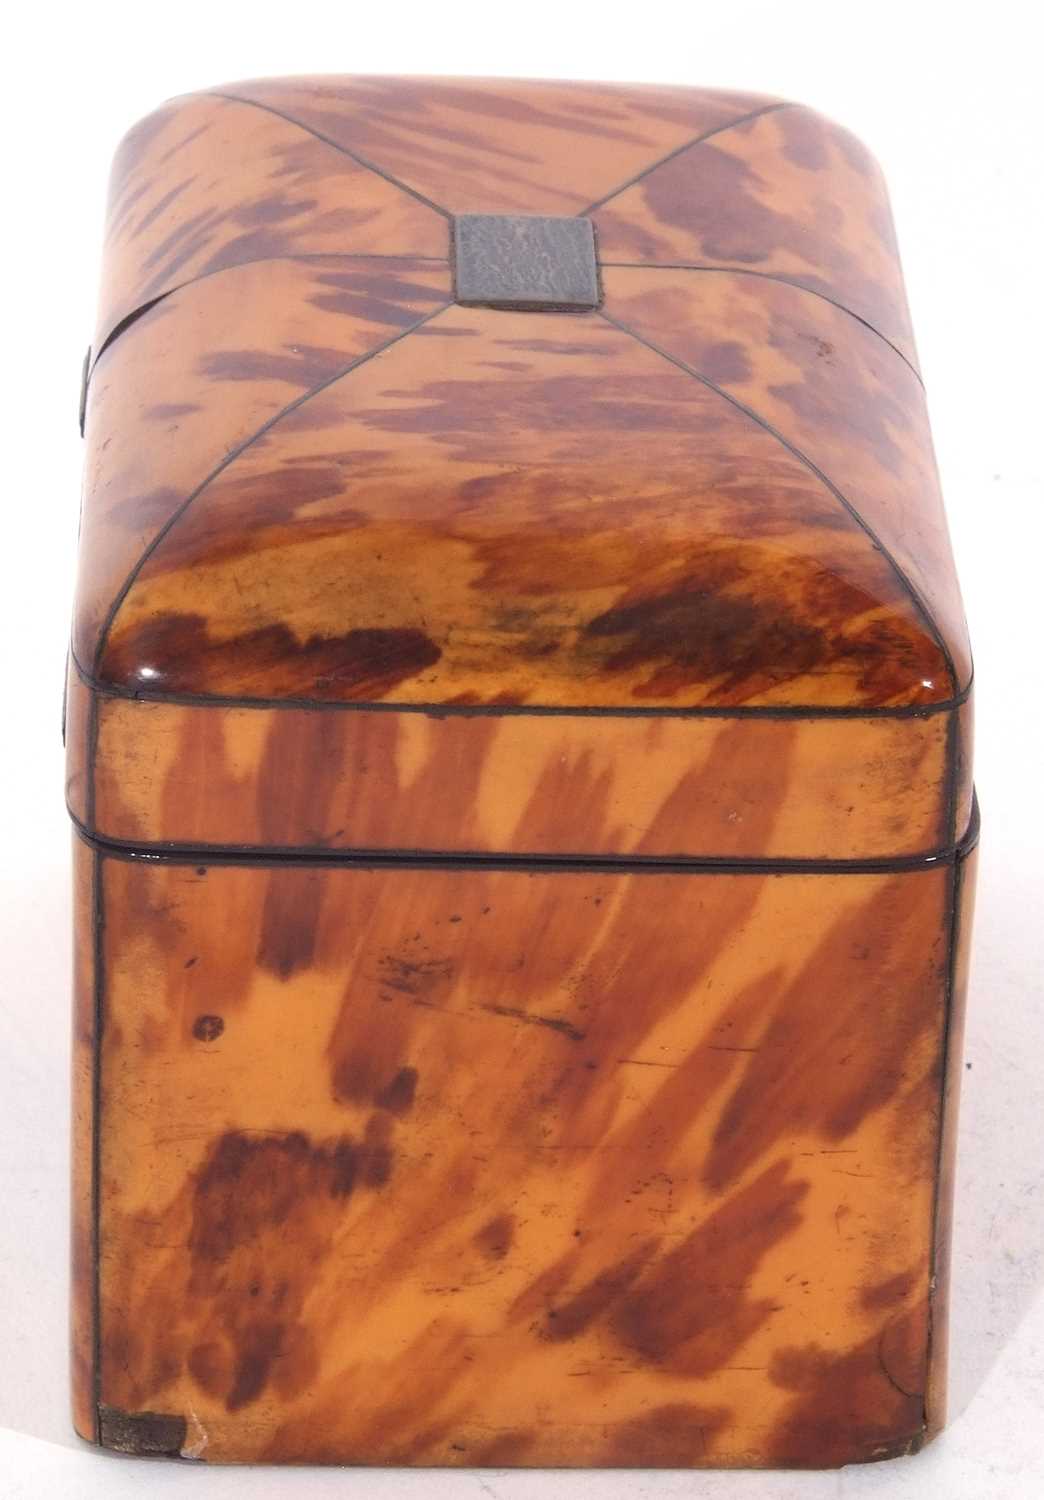 Mid-19th century tortoiseshell veneered tea caddy with pewter divisional inlays, the lid opening - Image 5 of 11